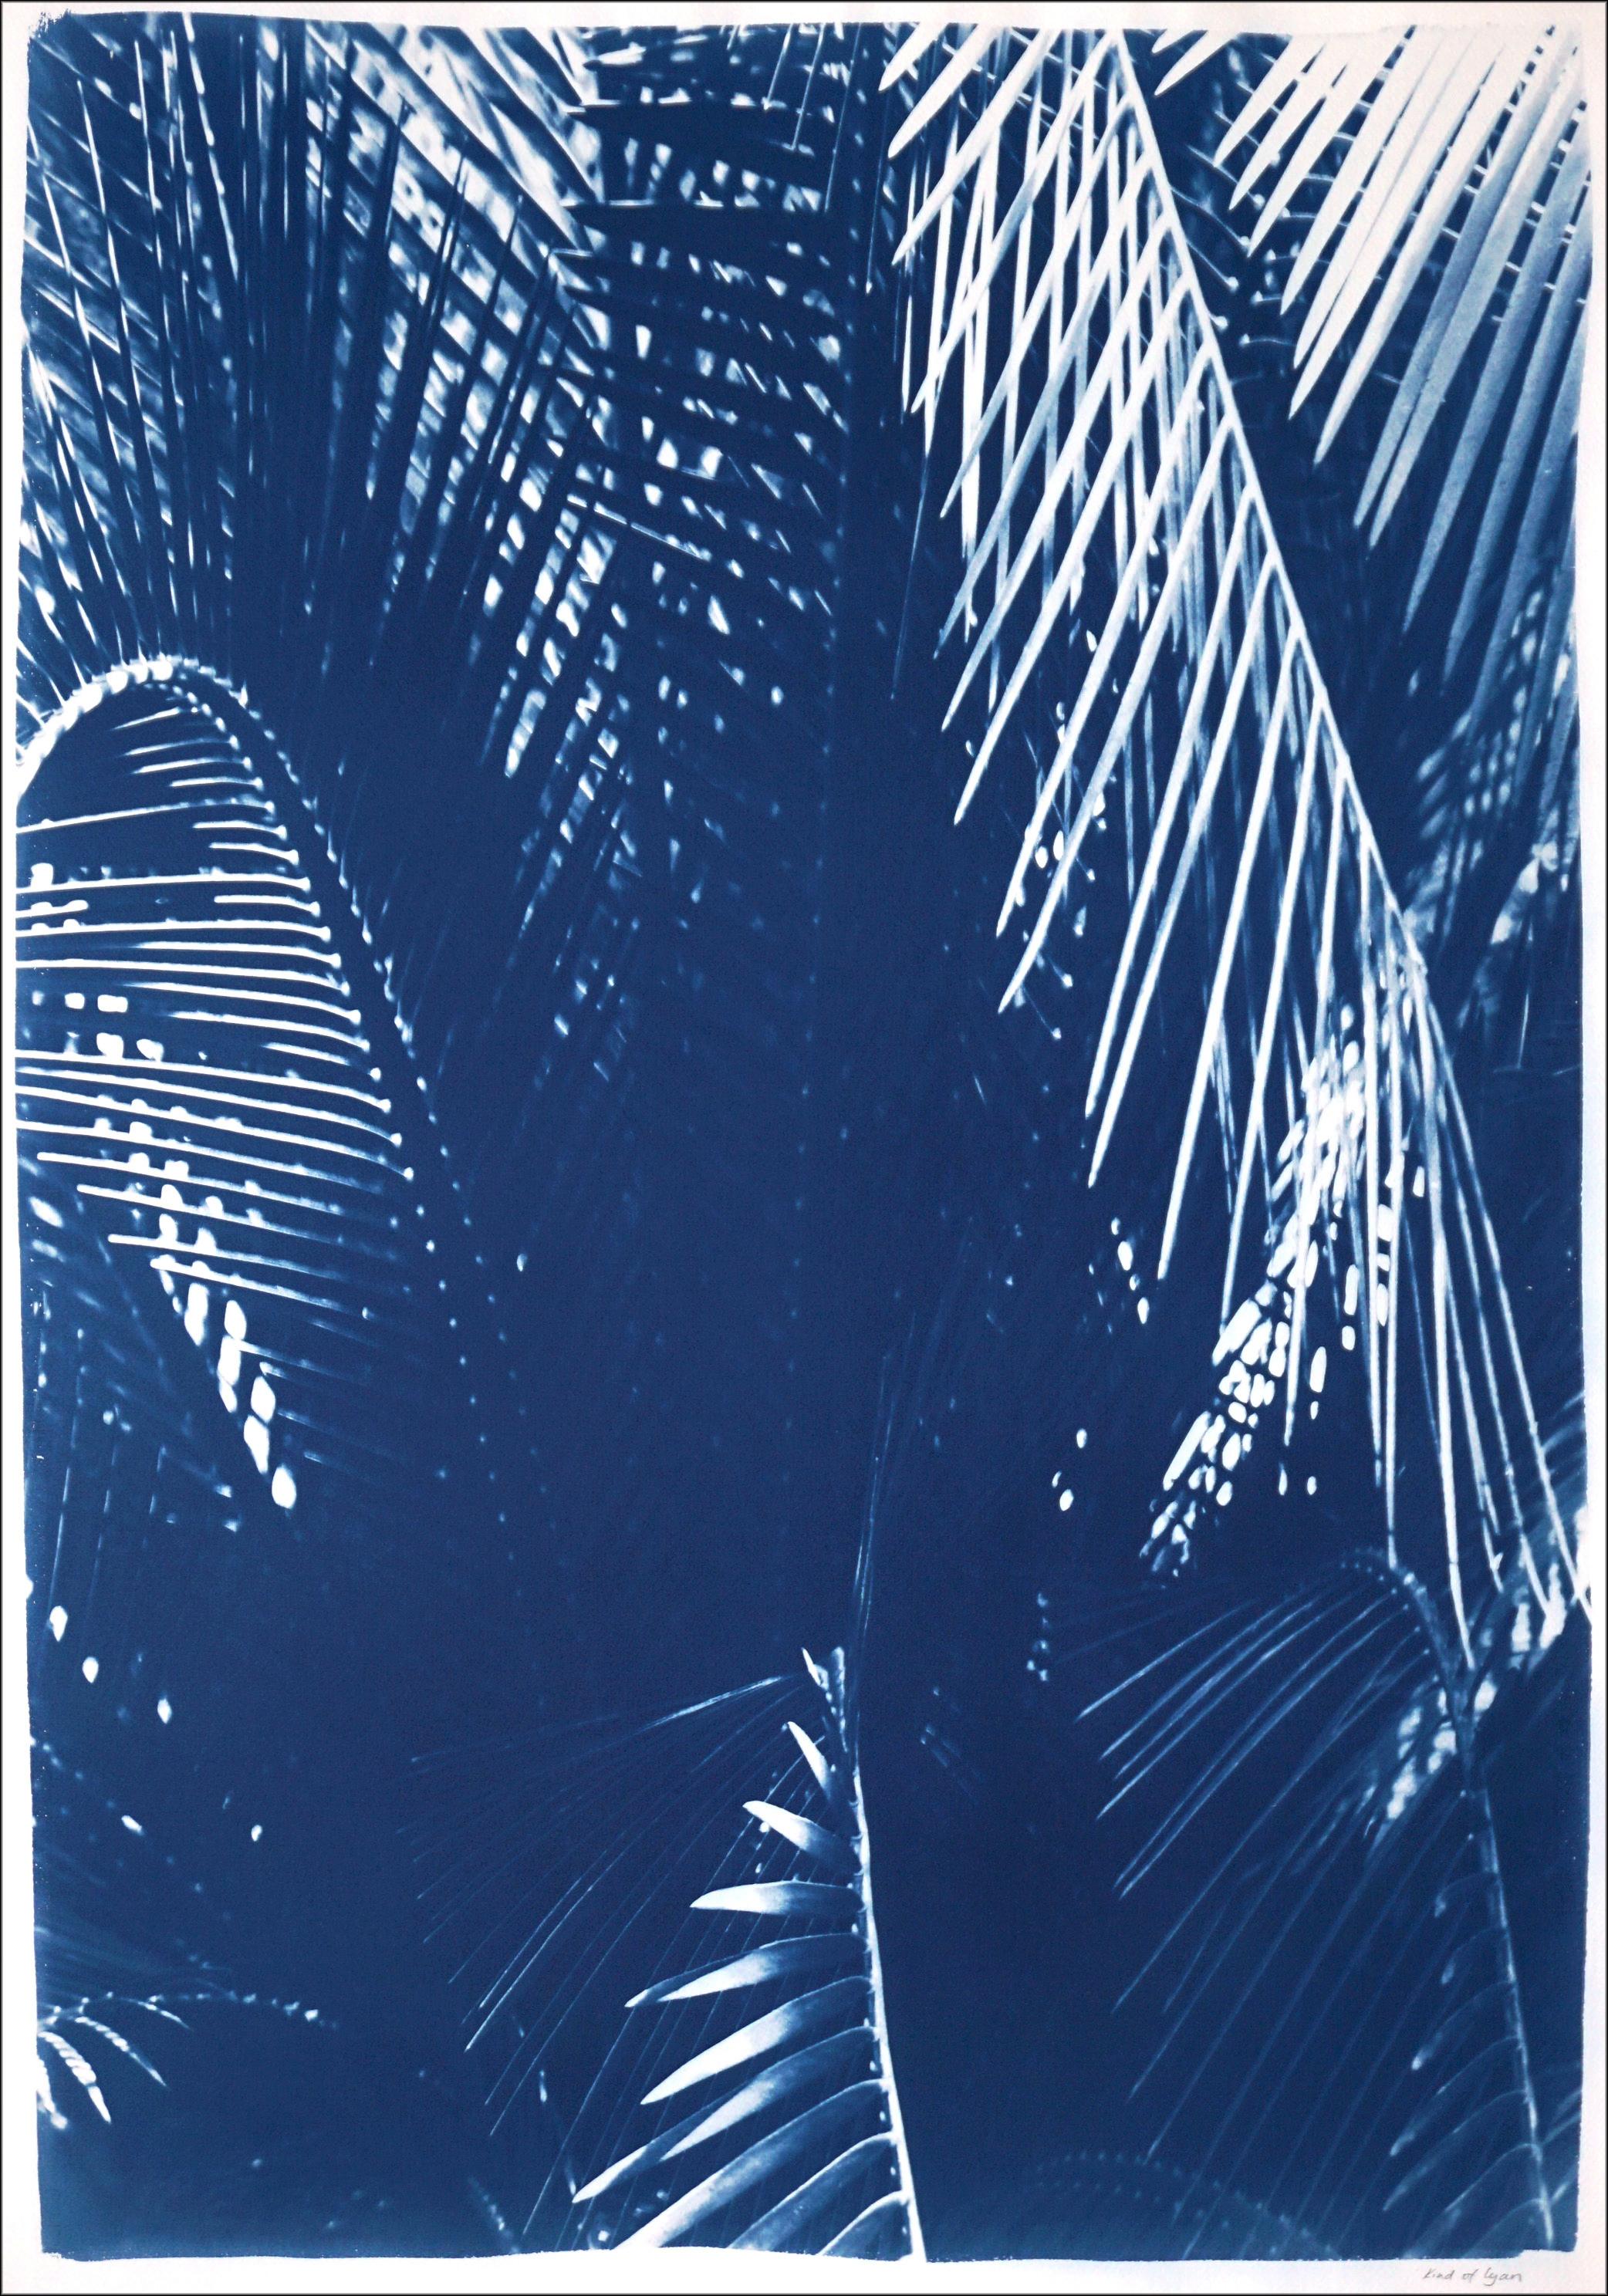 Botanical Triptych Cyanotype Print of Shady Majesty Palm Leaves Garden in Blue  - Naturalistic Painting by Kind of Cyan